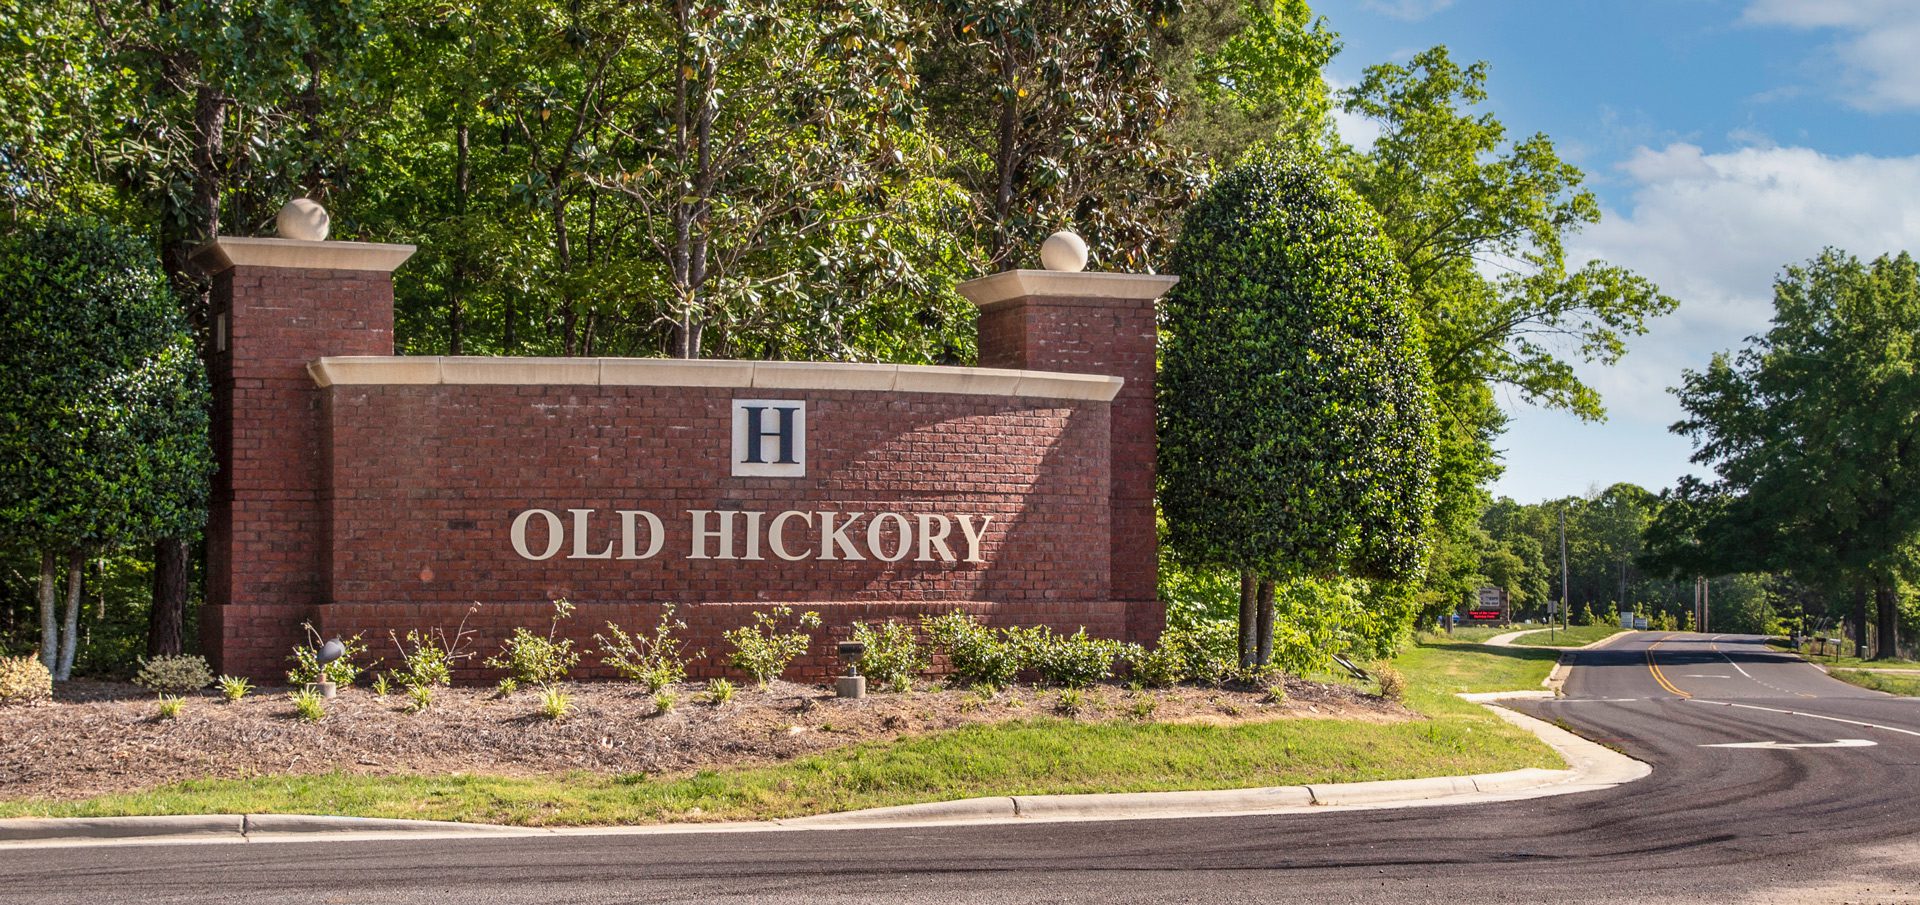 Old Hickory entrance monument sign brick